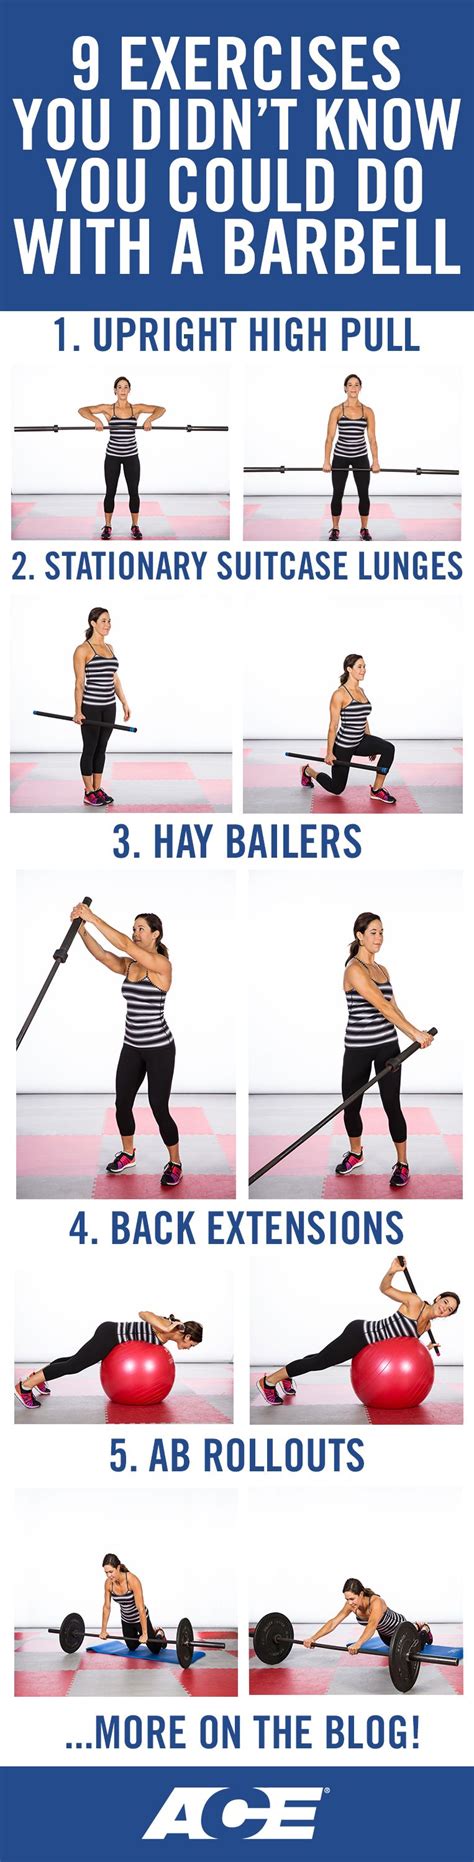 9 Exercises You Didnt Know You Could Do With A Barbell Barbell